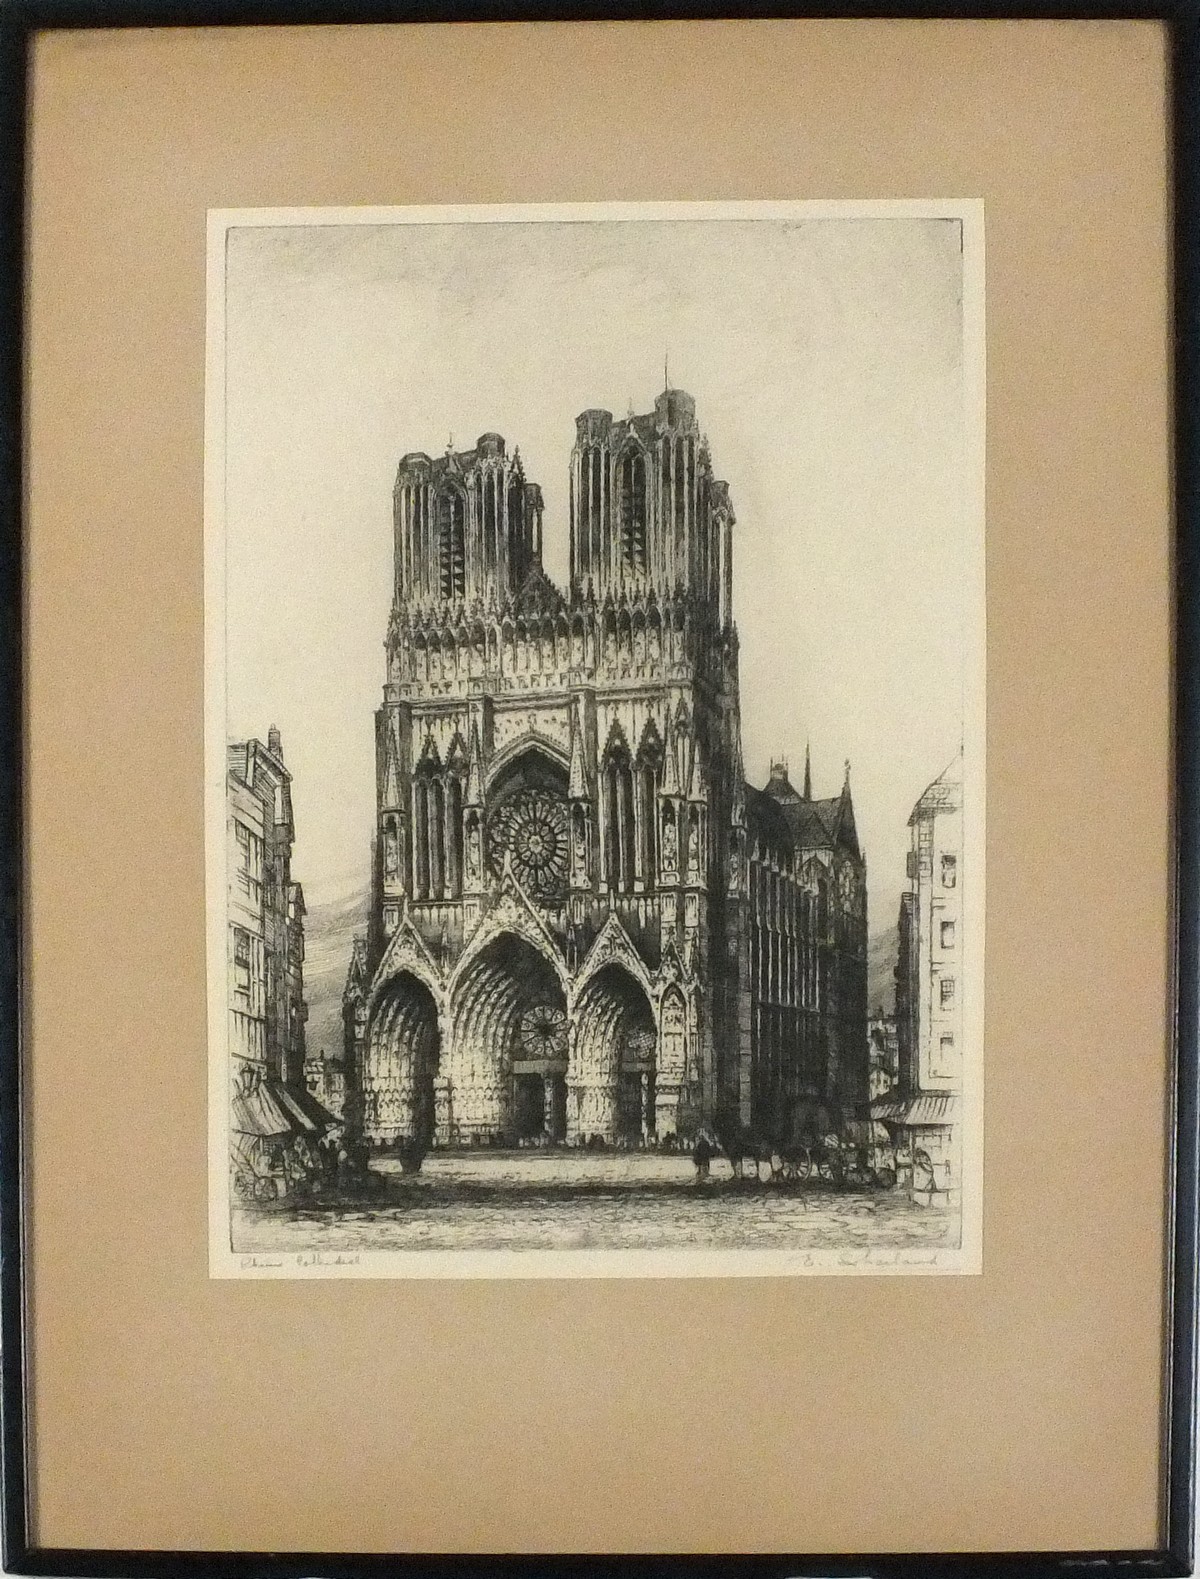 Edward W SHARLAND (British 1884-1967) Reims Cathedral, Steel engraving, Signed in pencil, 15.75" x - Image 2 of 2